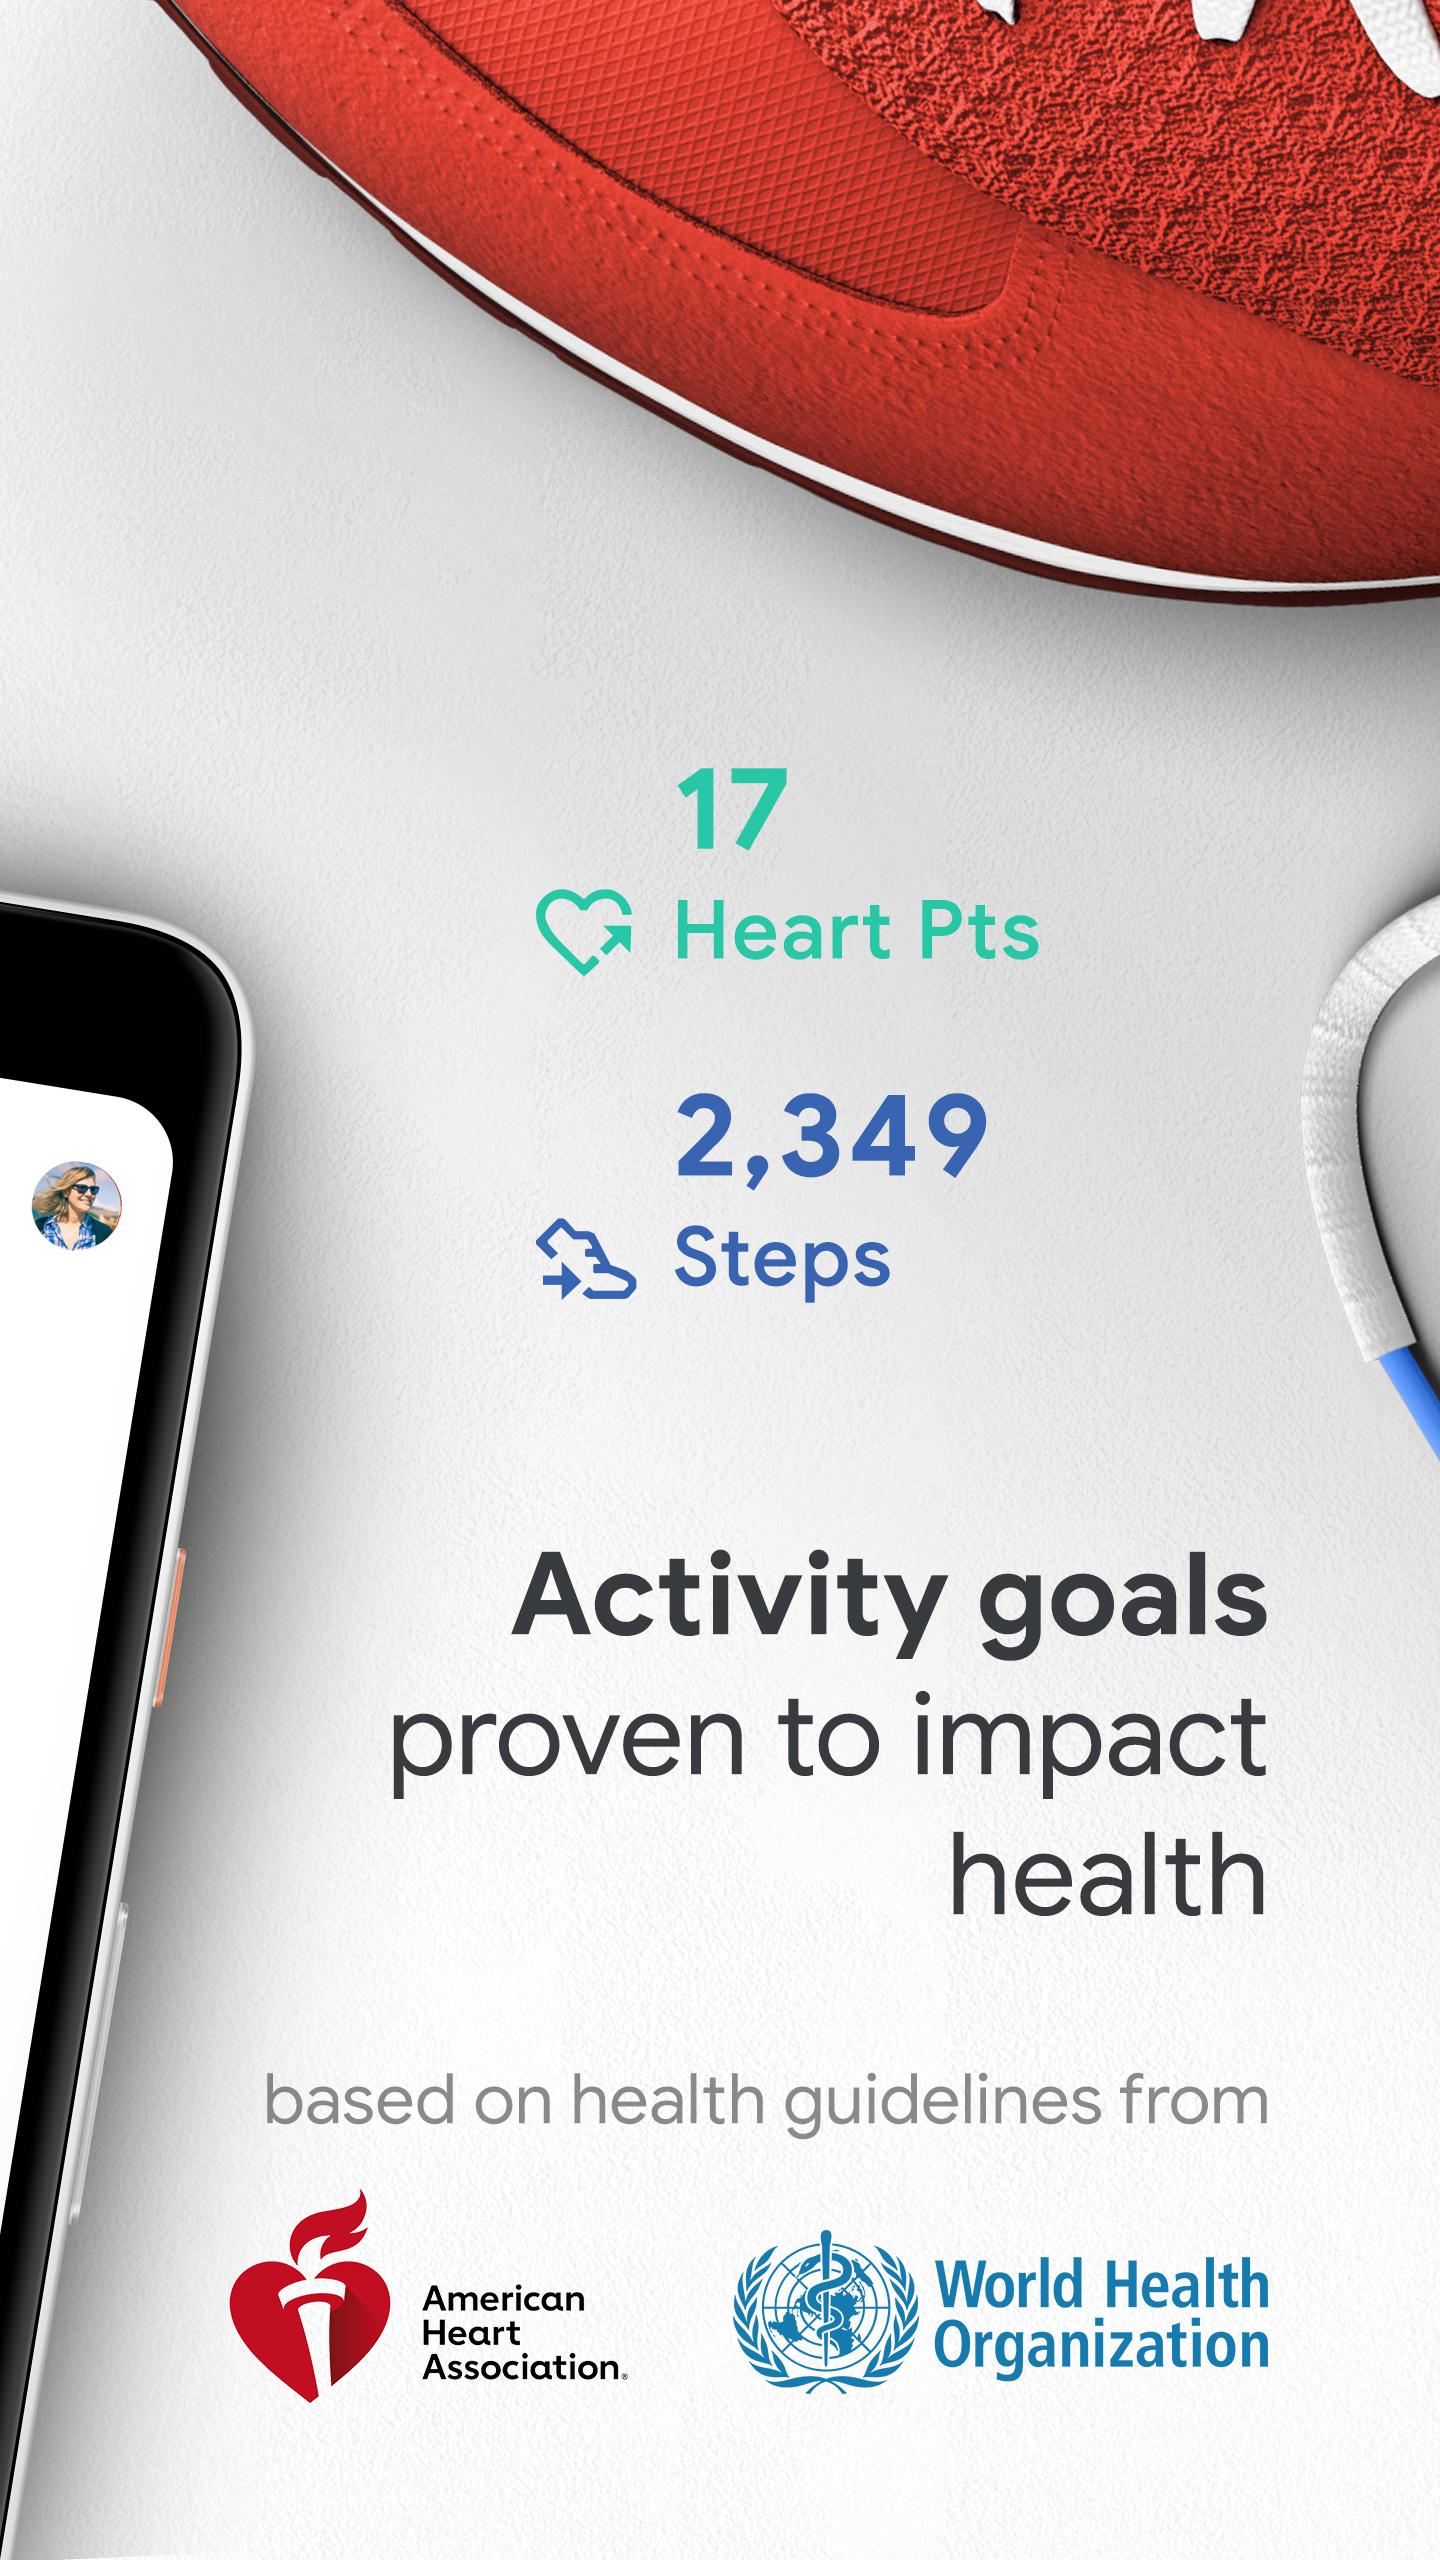 Google Fit: Health and Activity Tracking 2.45.13-130 Screenshot 2